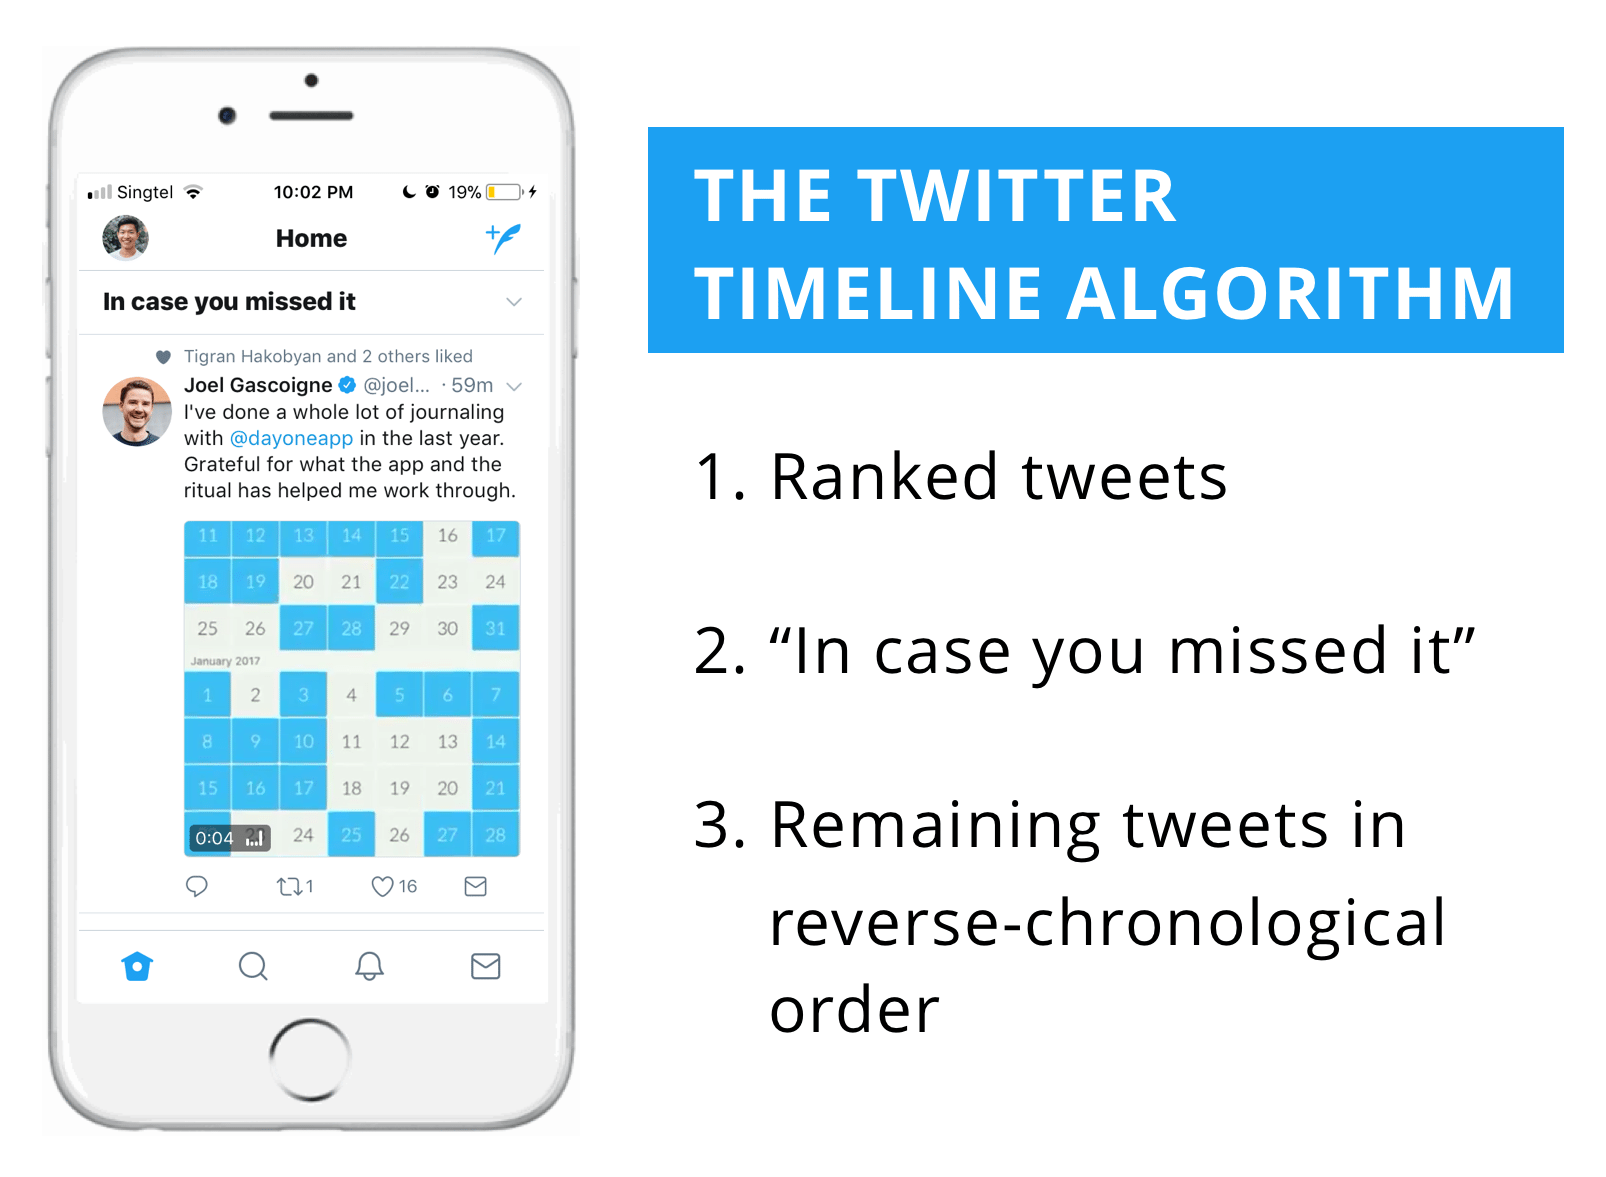 Twitter Timeline Algorithm Explained (and 6 Ways to Increase Your Reach)